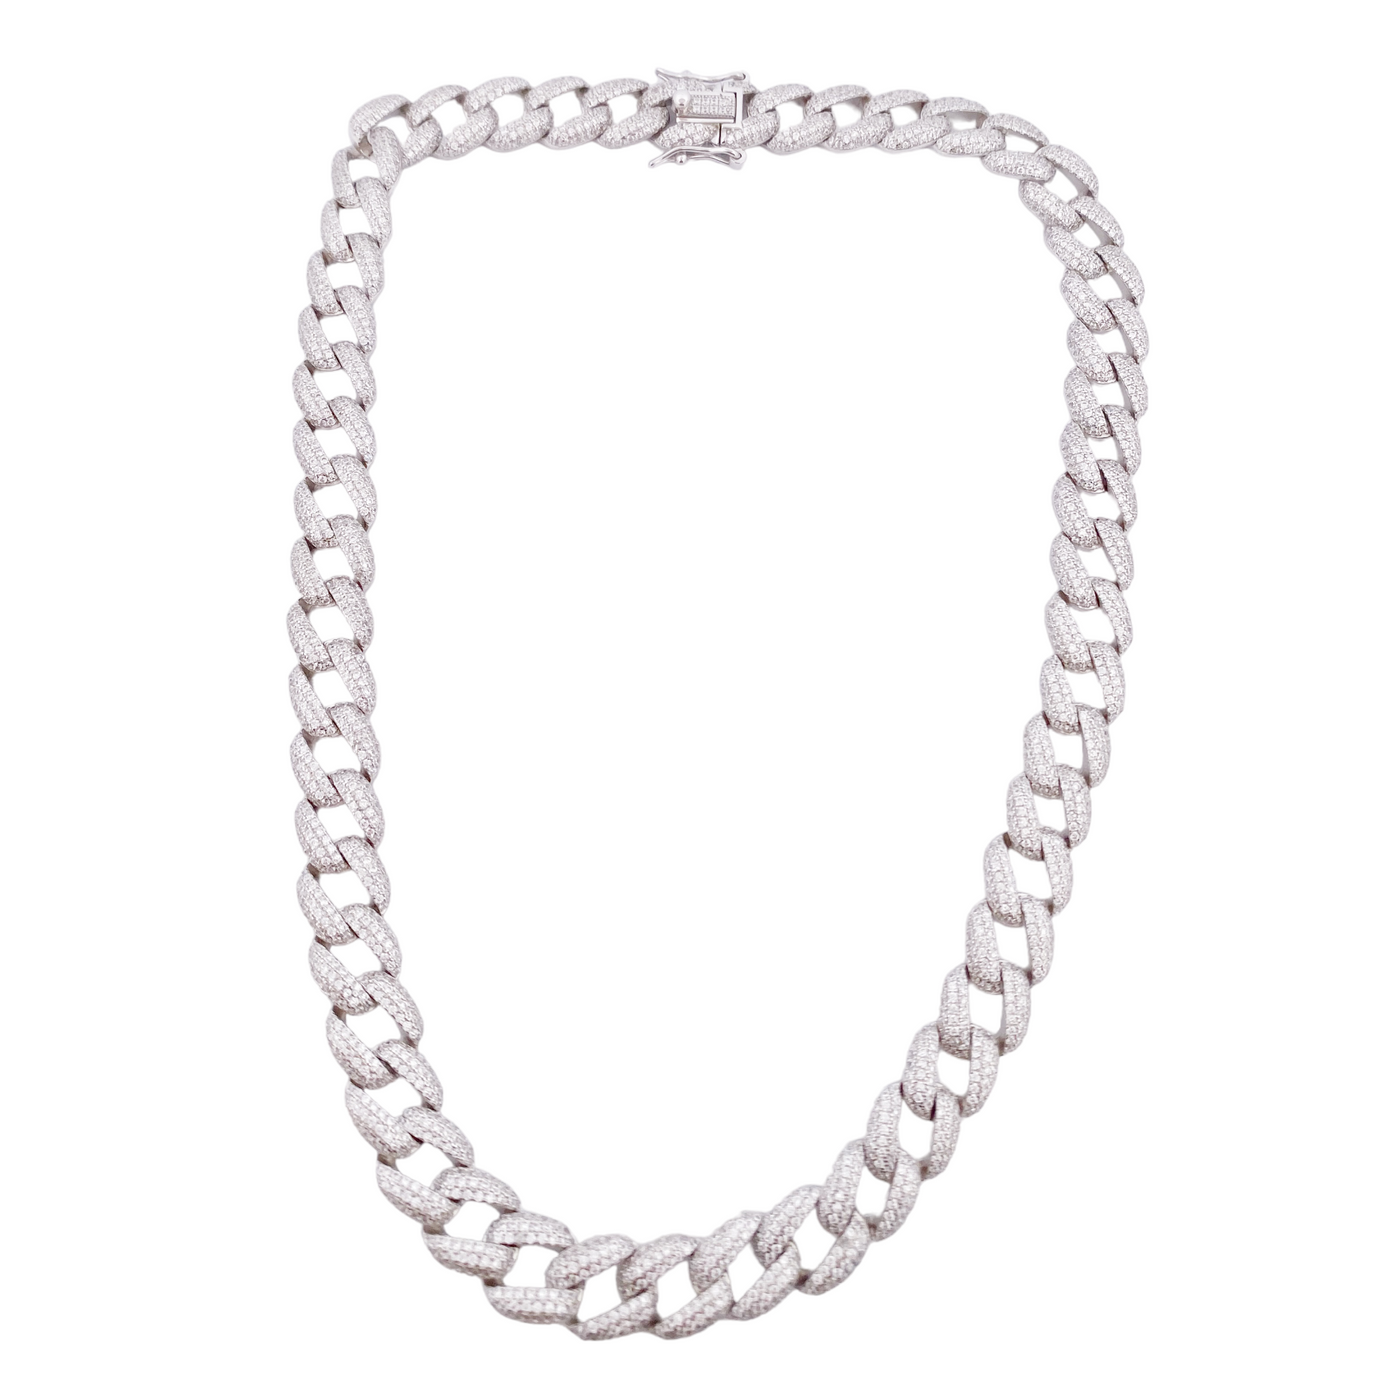 SILVER GROUMETTE NECKLACE - RHODIUM PLATED